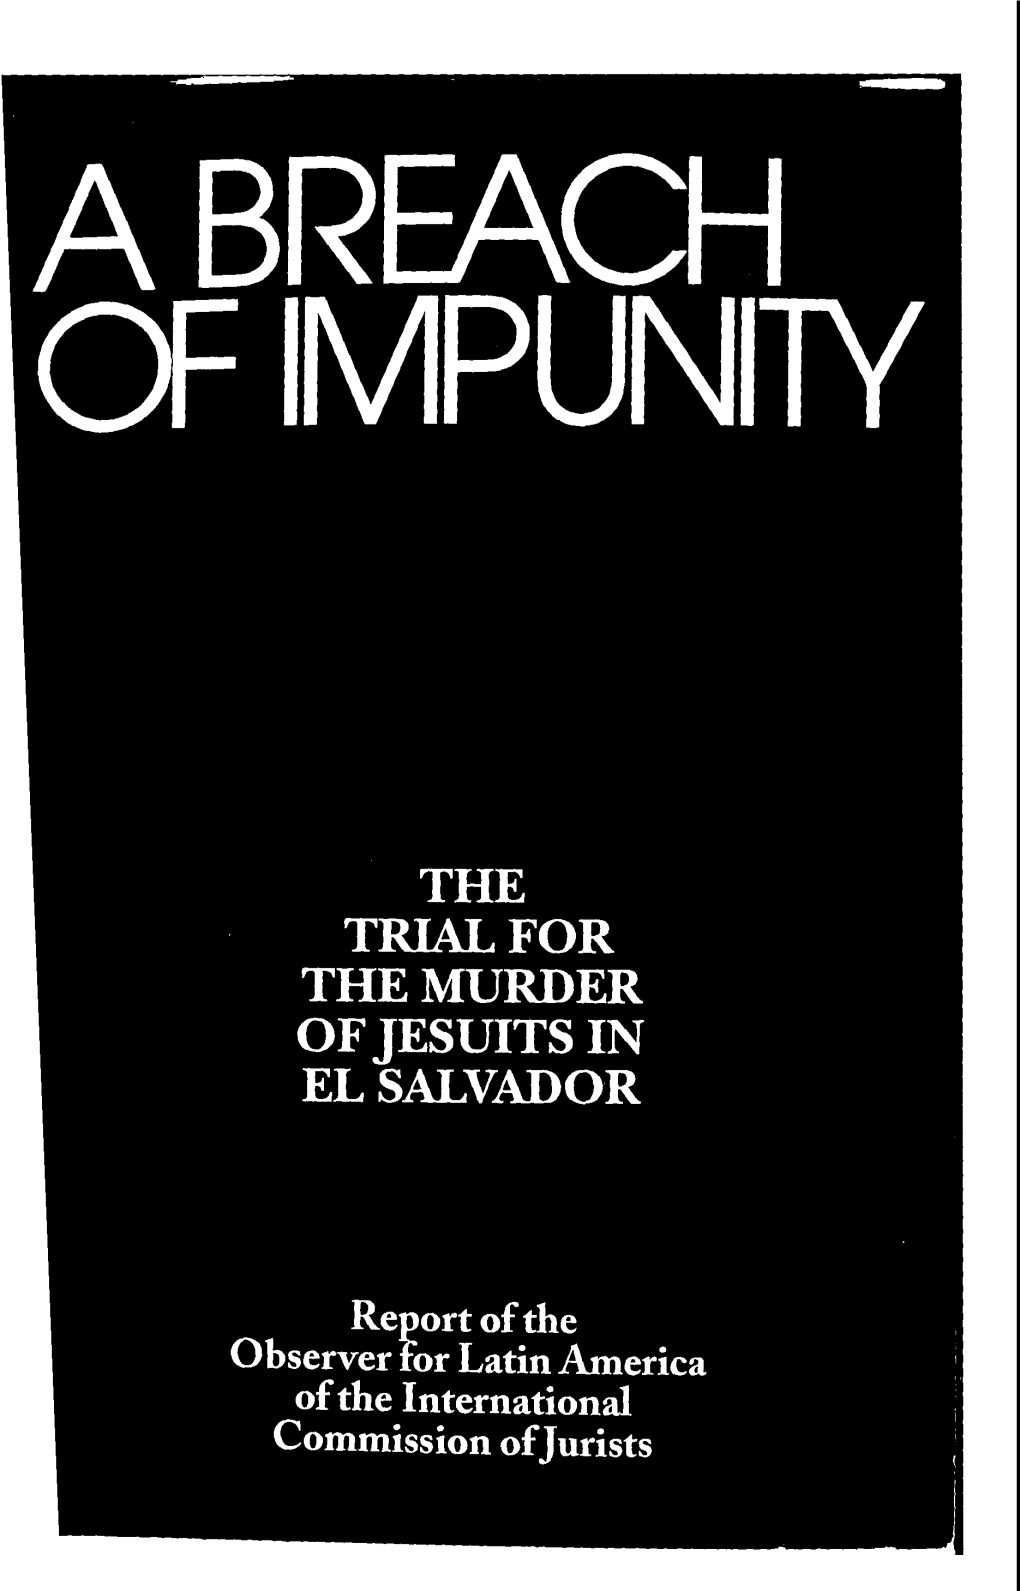 The Trial for the Murder of Jesuits in El Salvador